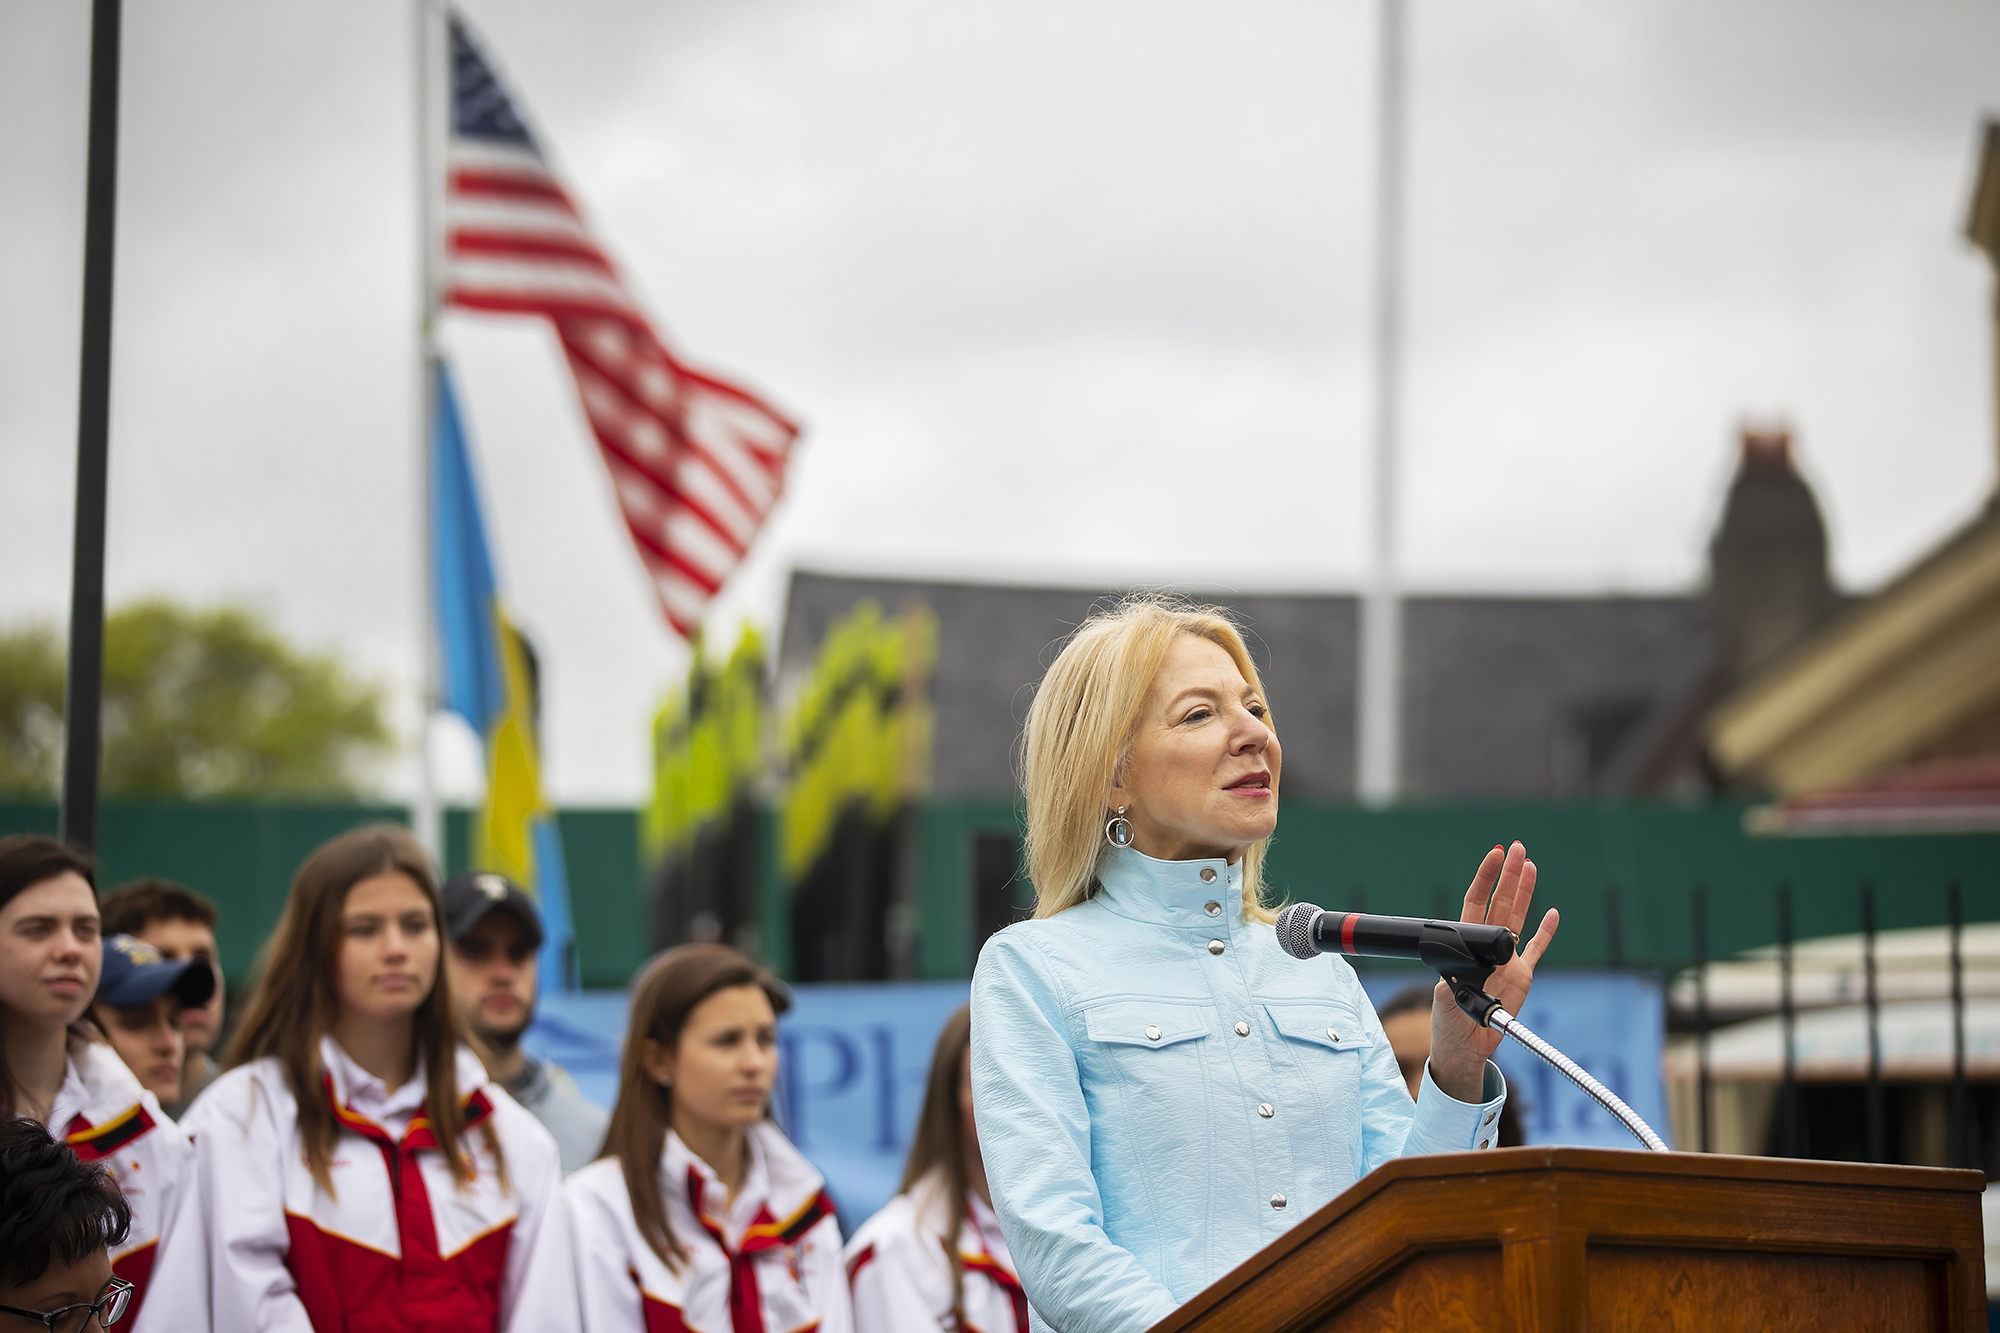 Amy Gutmann speaks at a podium with American flag and a crowd behind her. 